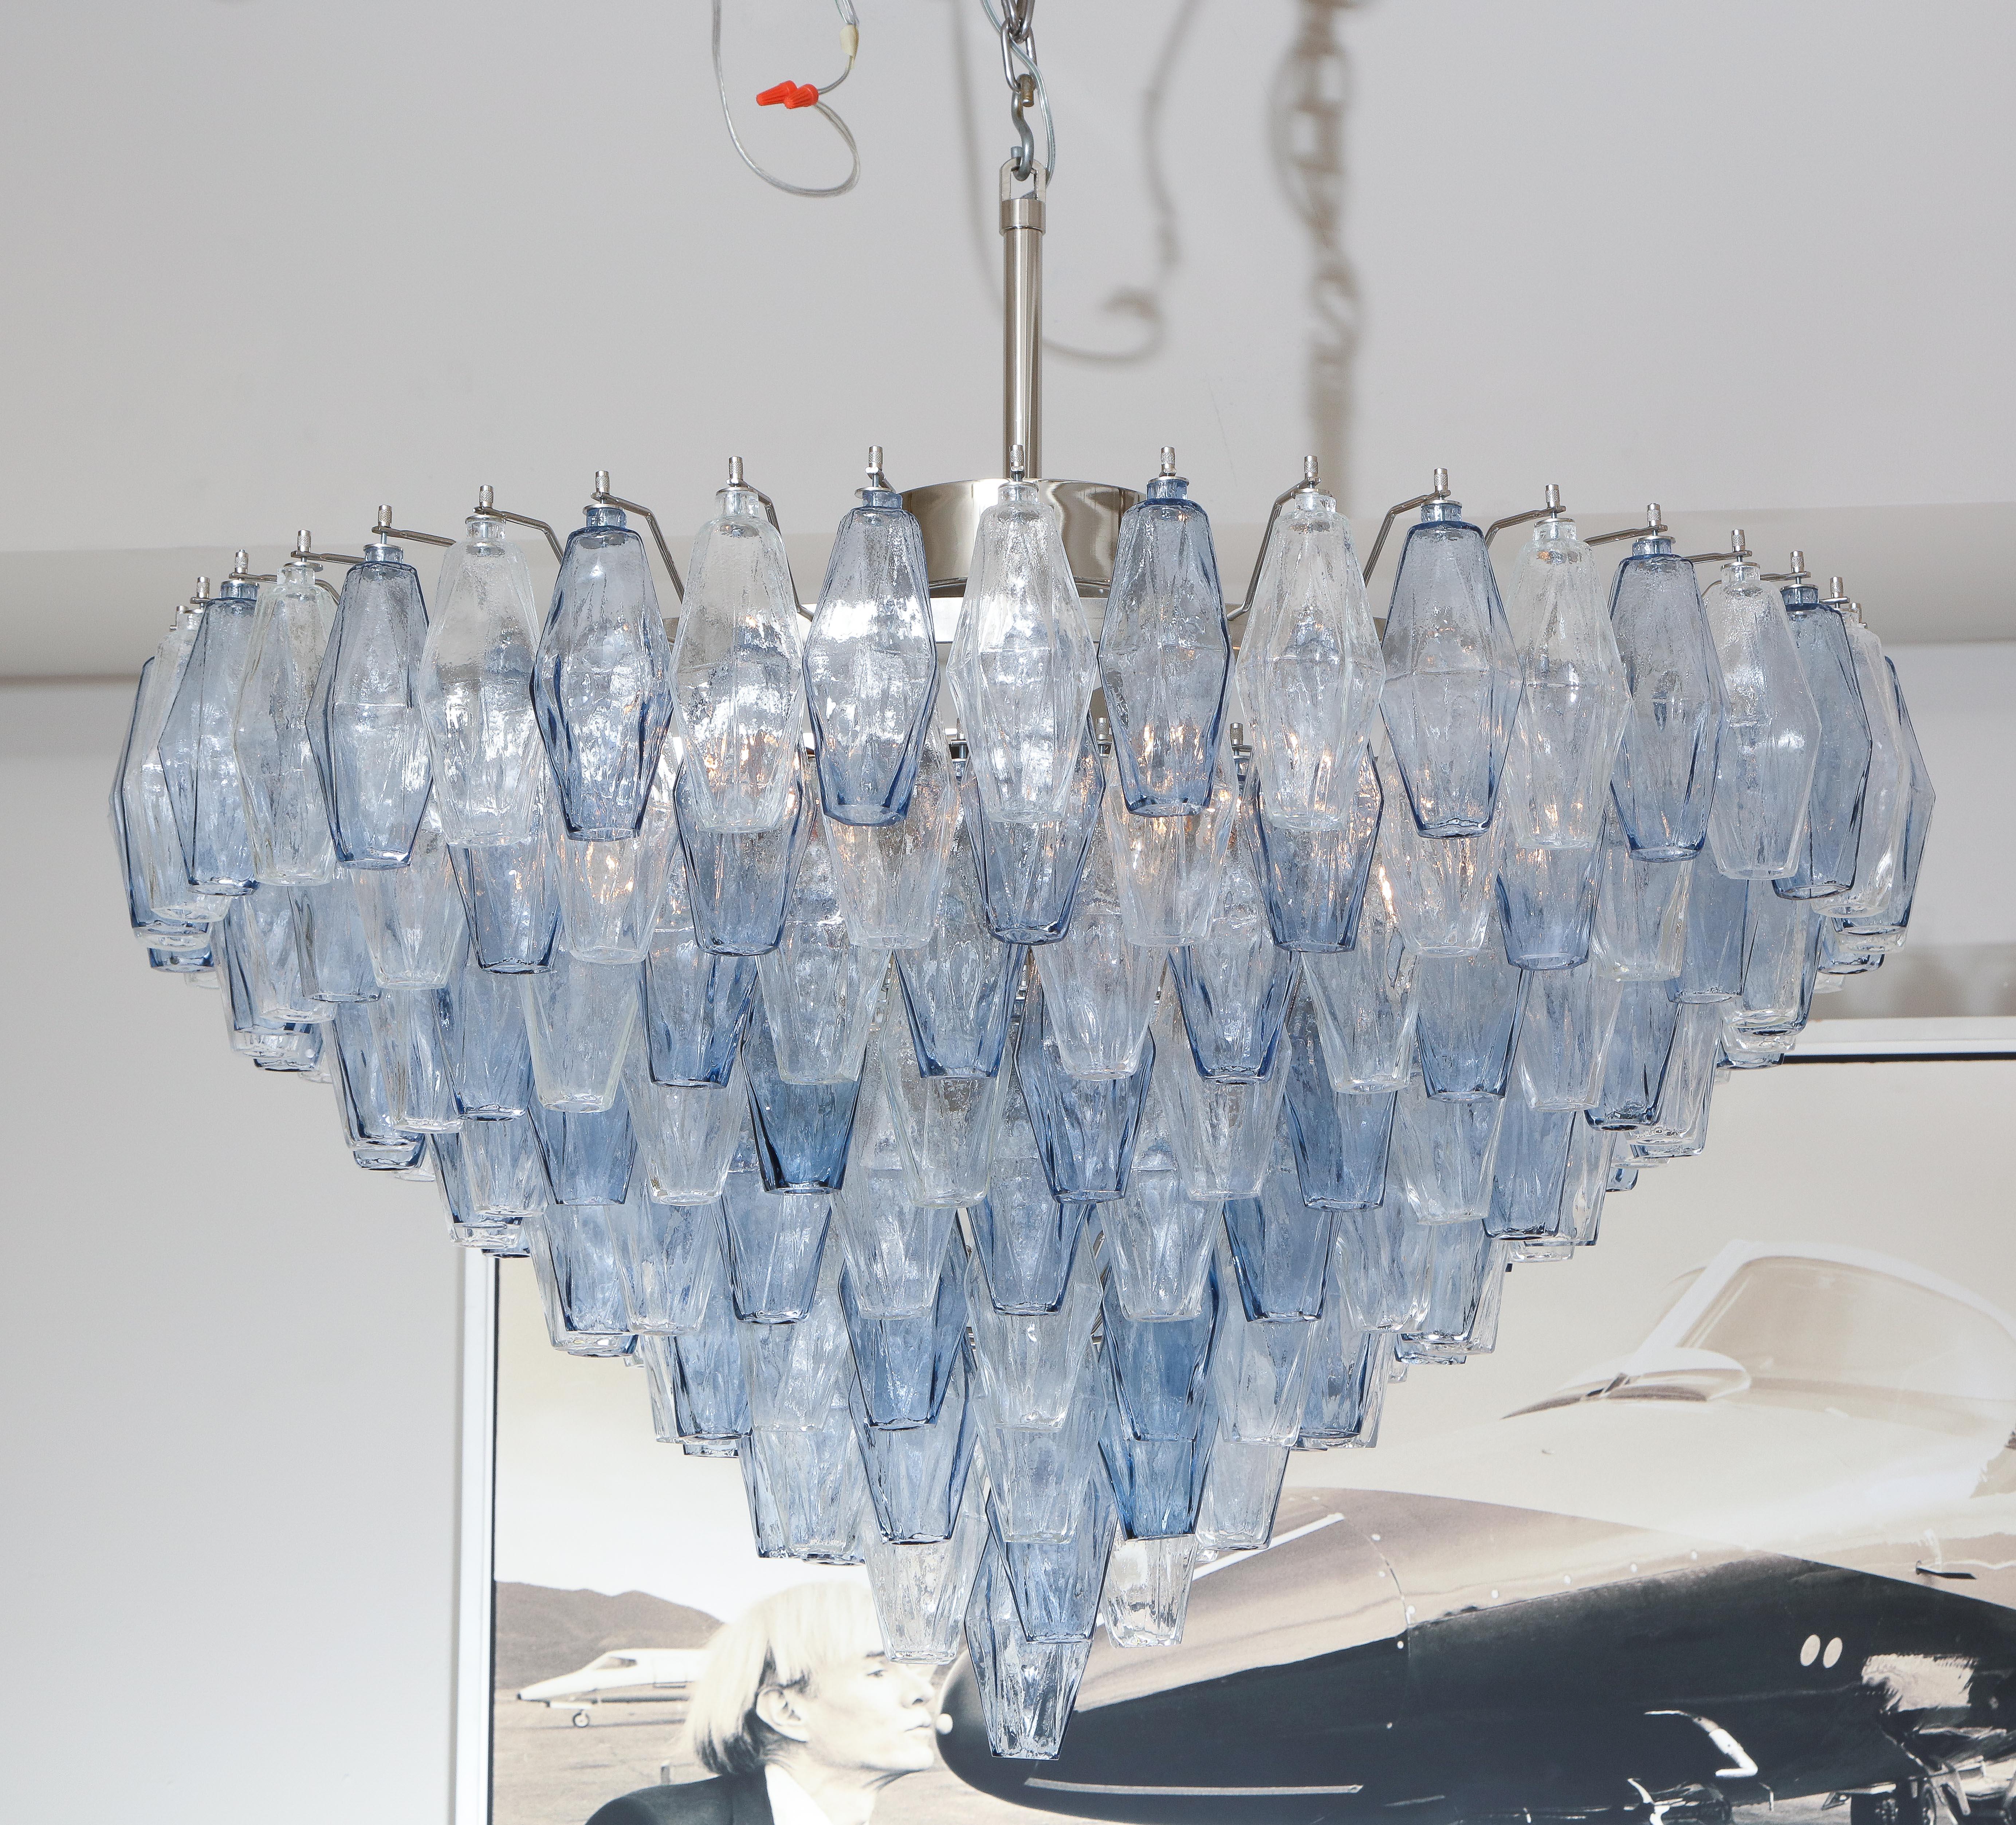 Custom Murano polyhedron glass chandelier in blue and clear color combination. Customization is available for different glass colors, color combinations, dimensions and finishes.